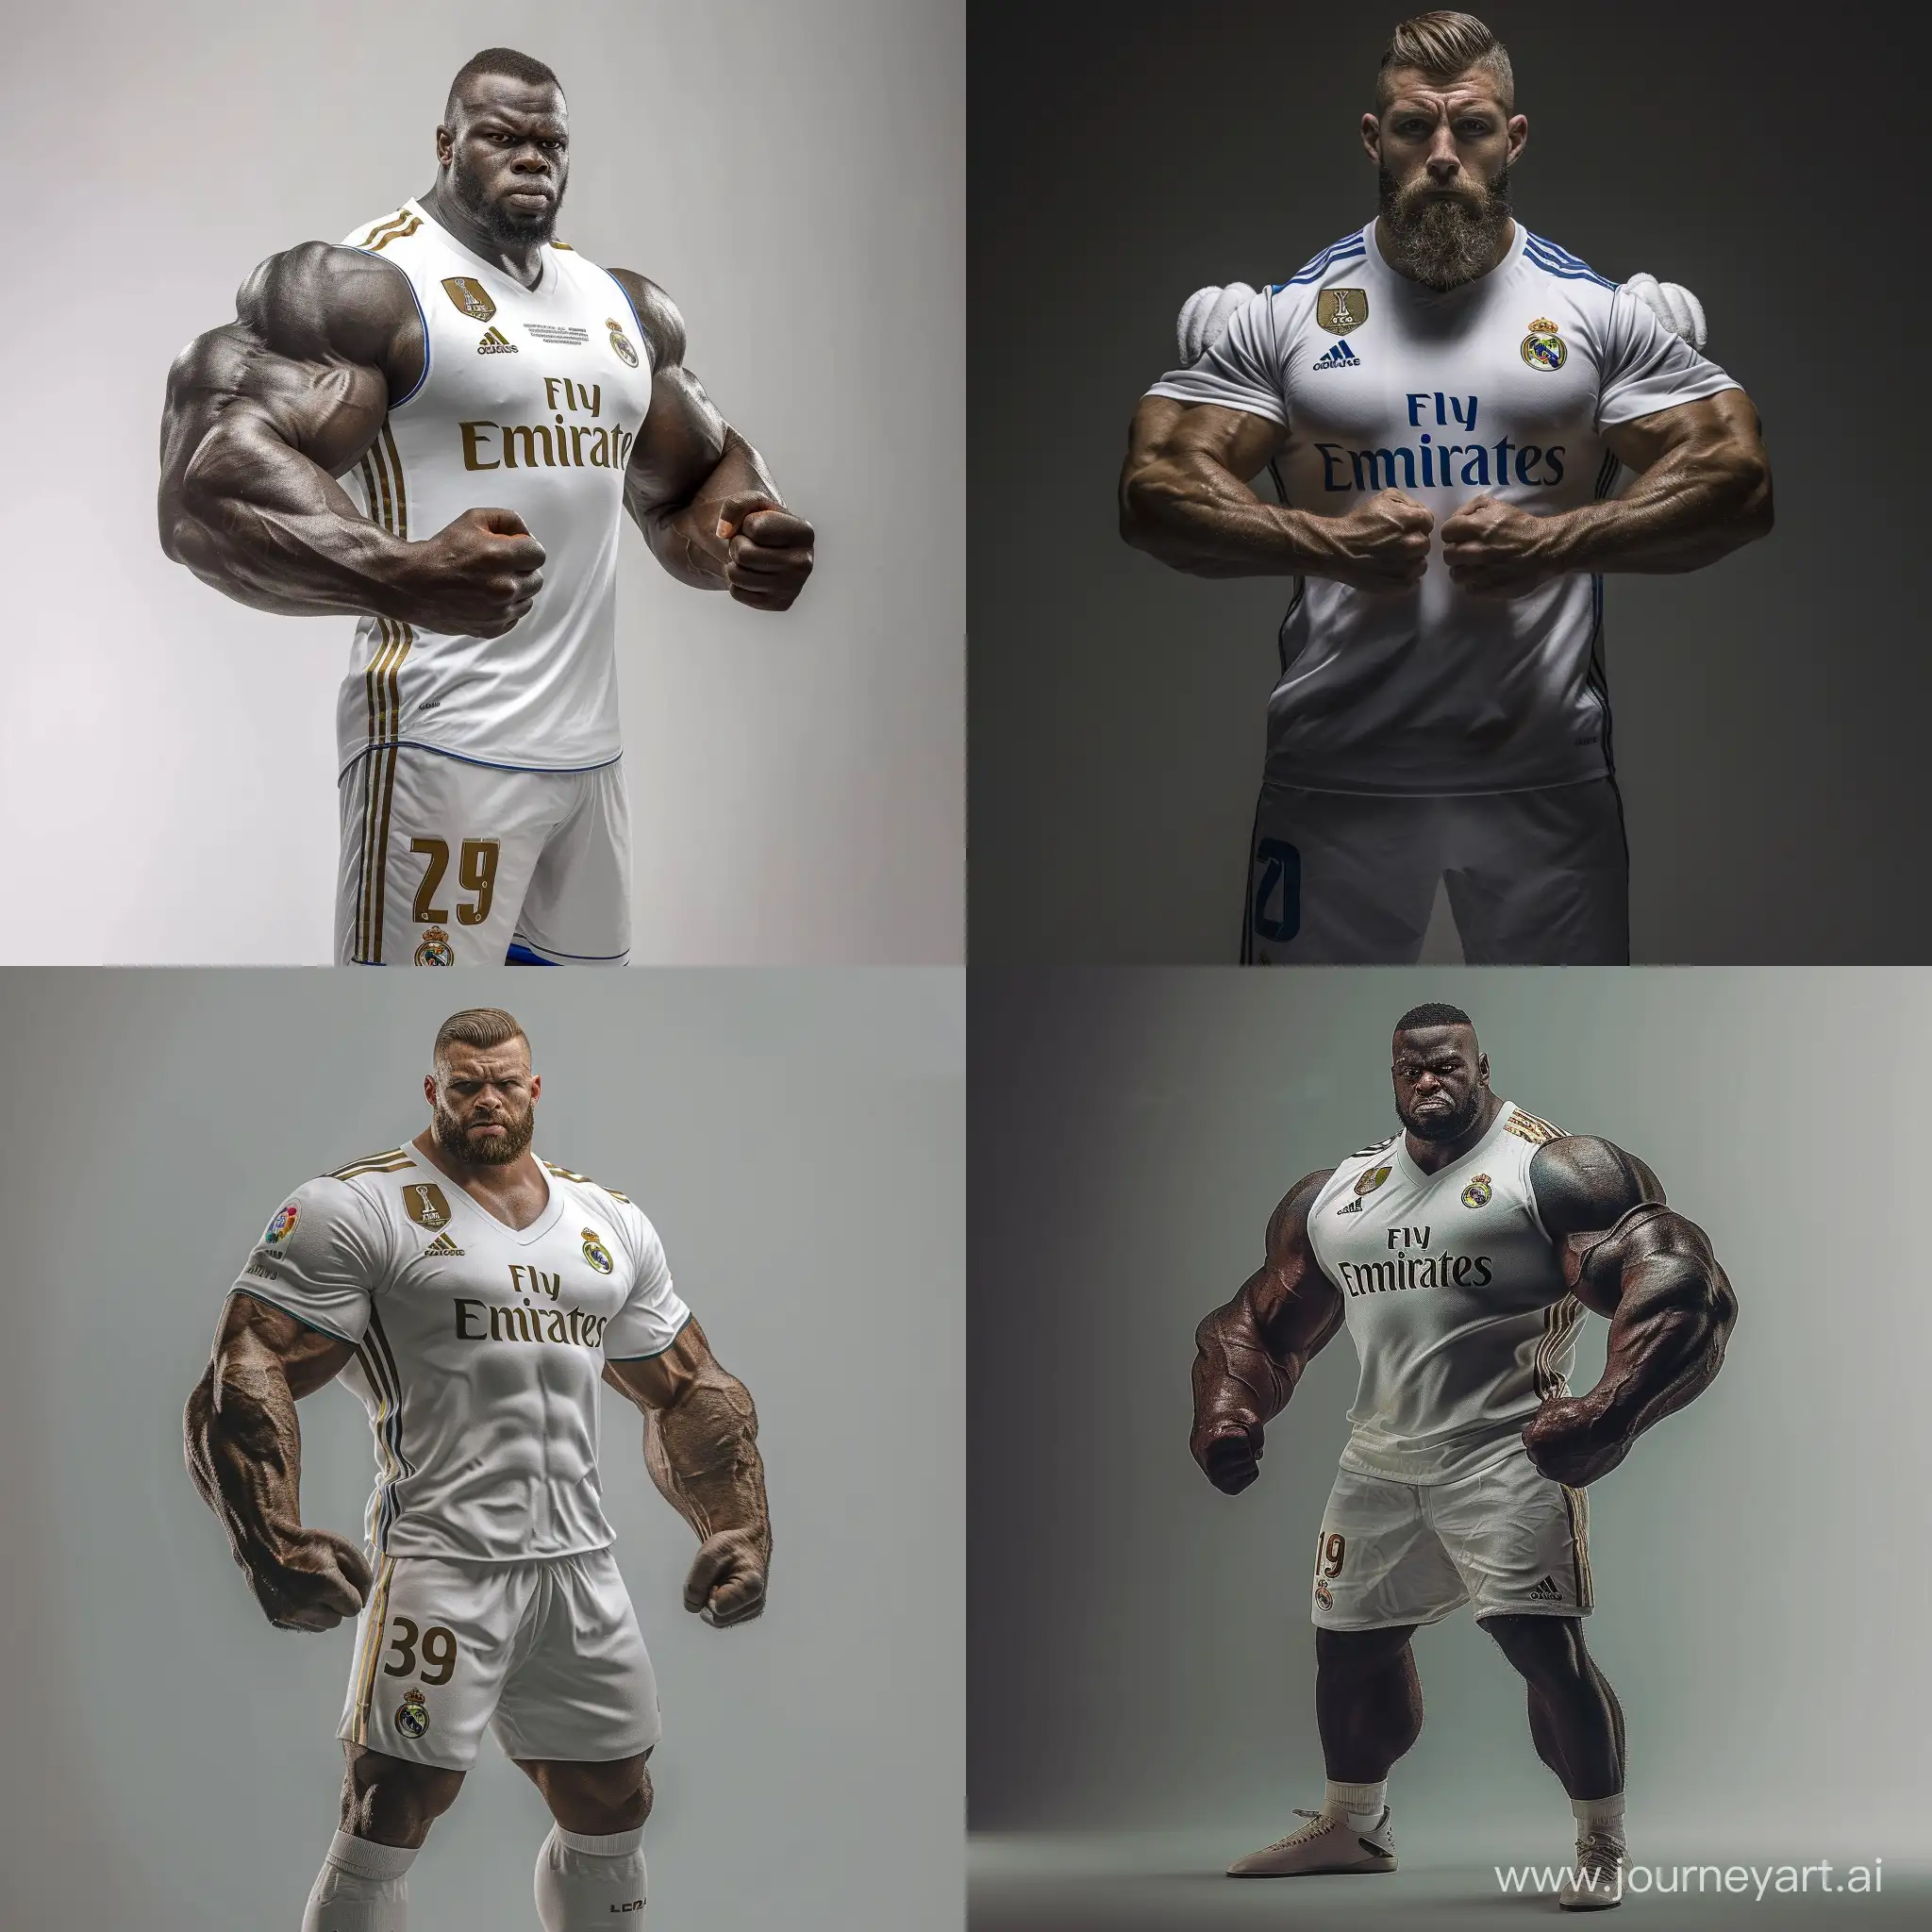 A big strong giant with massive muscles in a Real Madrid uniform